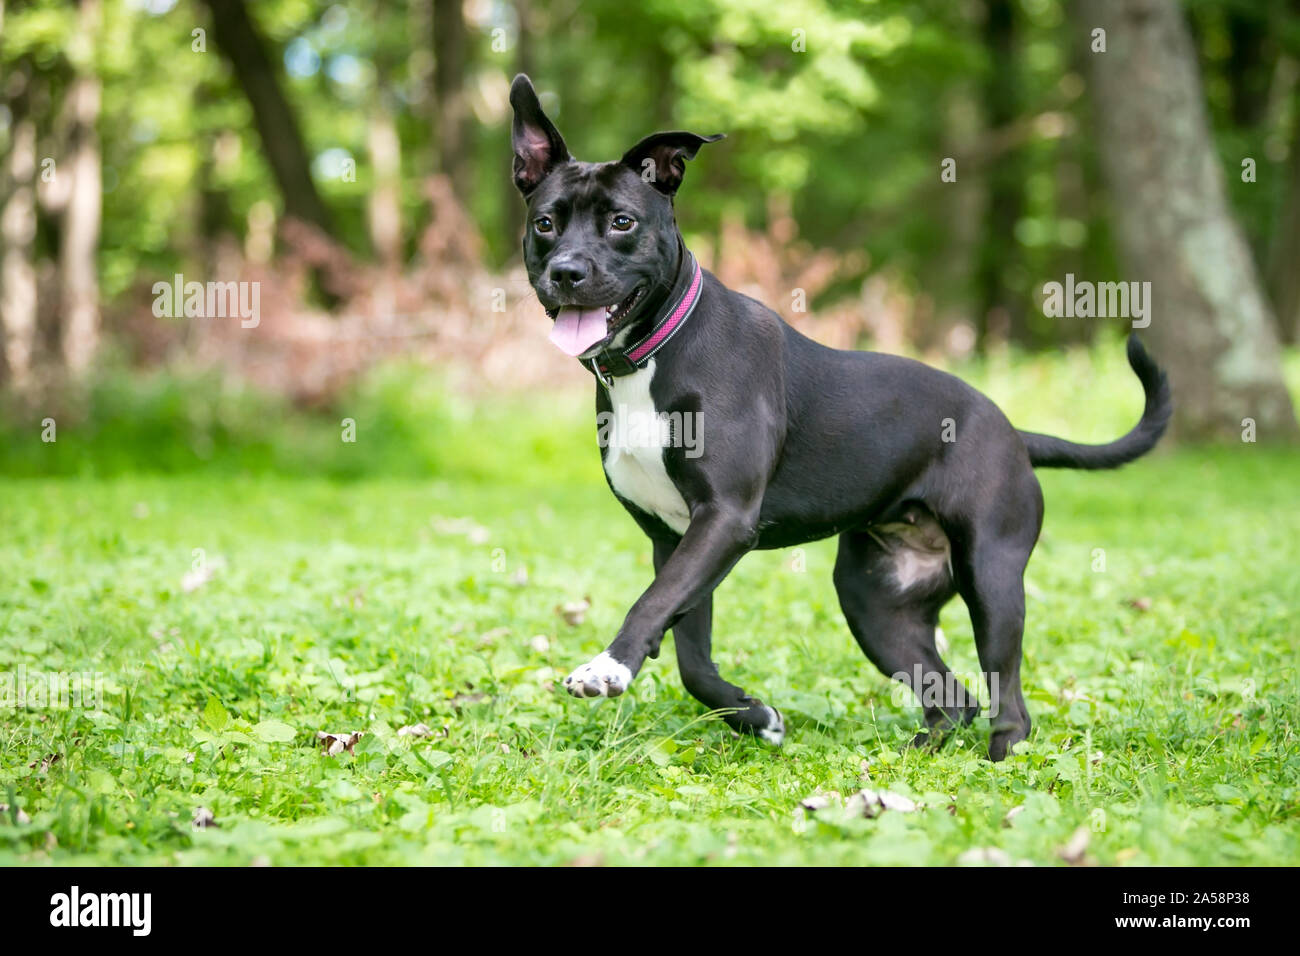 A Happy Black And White Pit Bull Terrier Mixed Breed Dog With Floppy Ears  Running Outdoors Stock Photo - Alamy